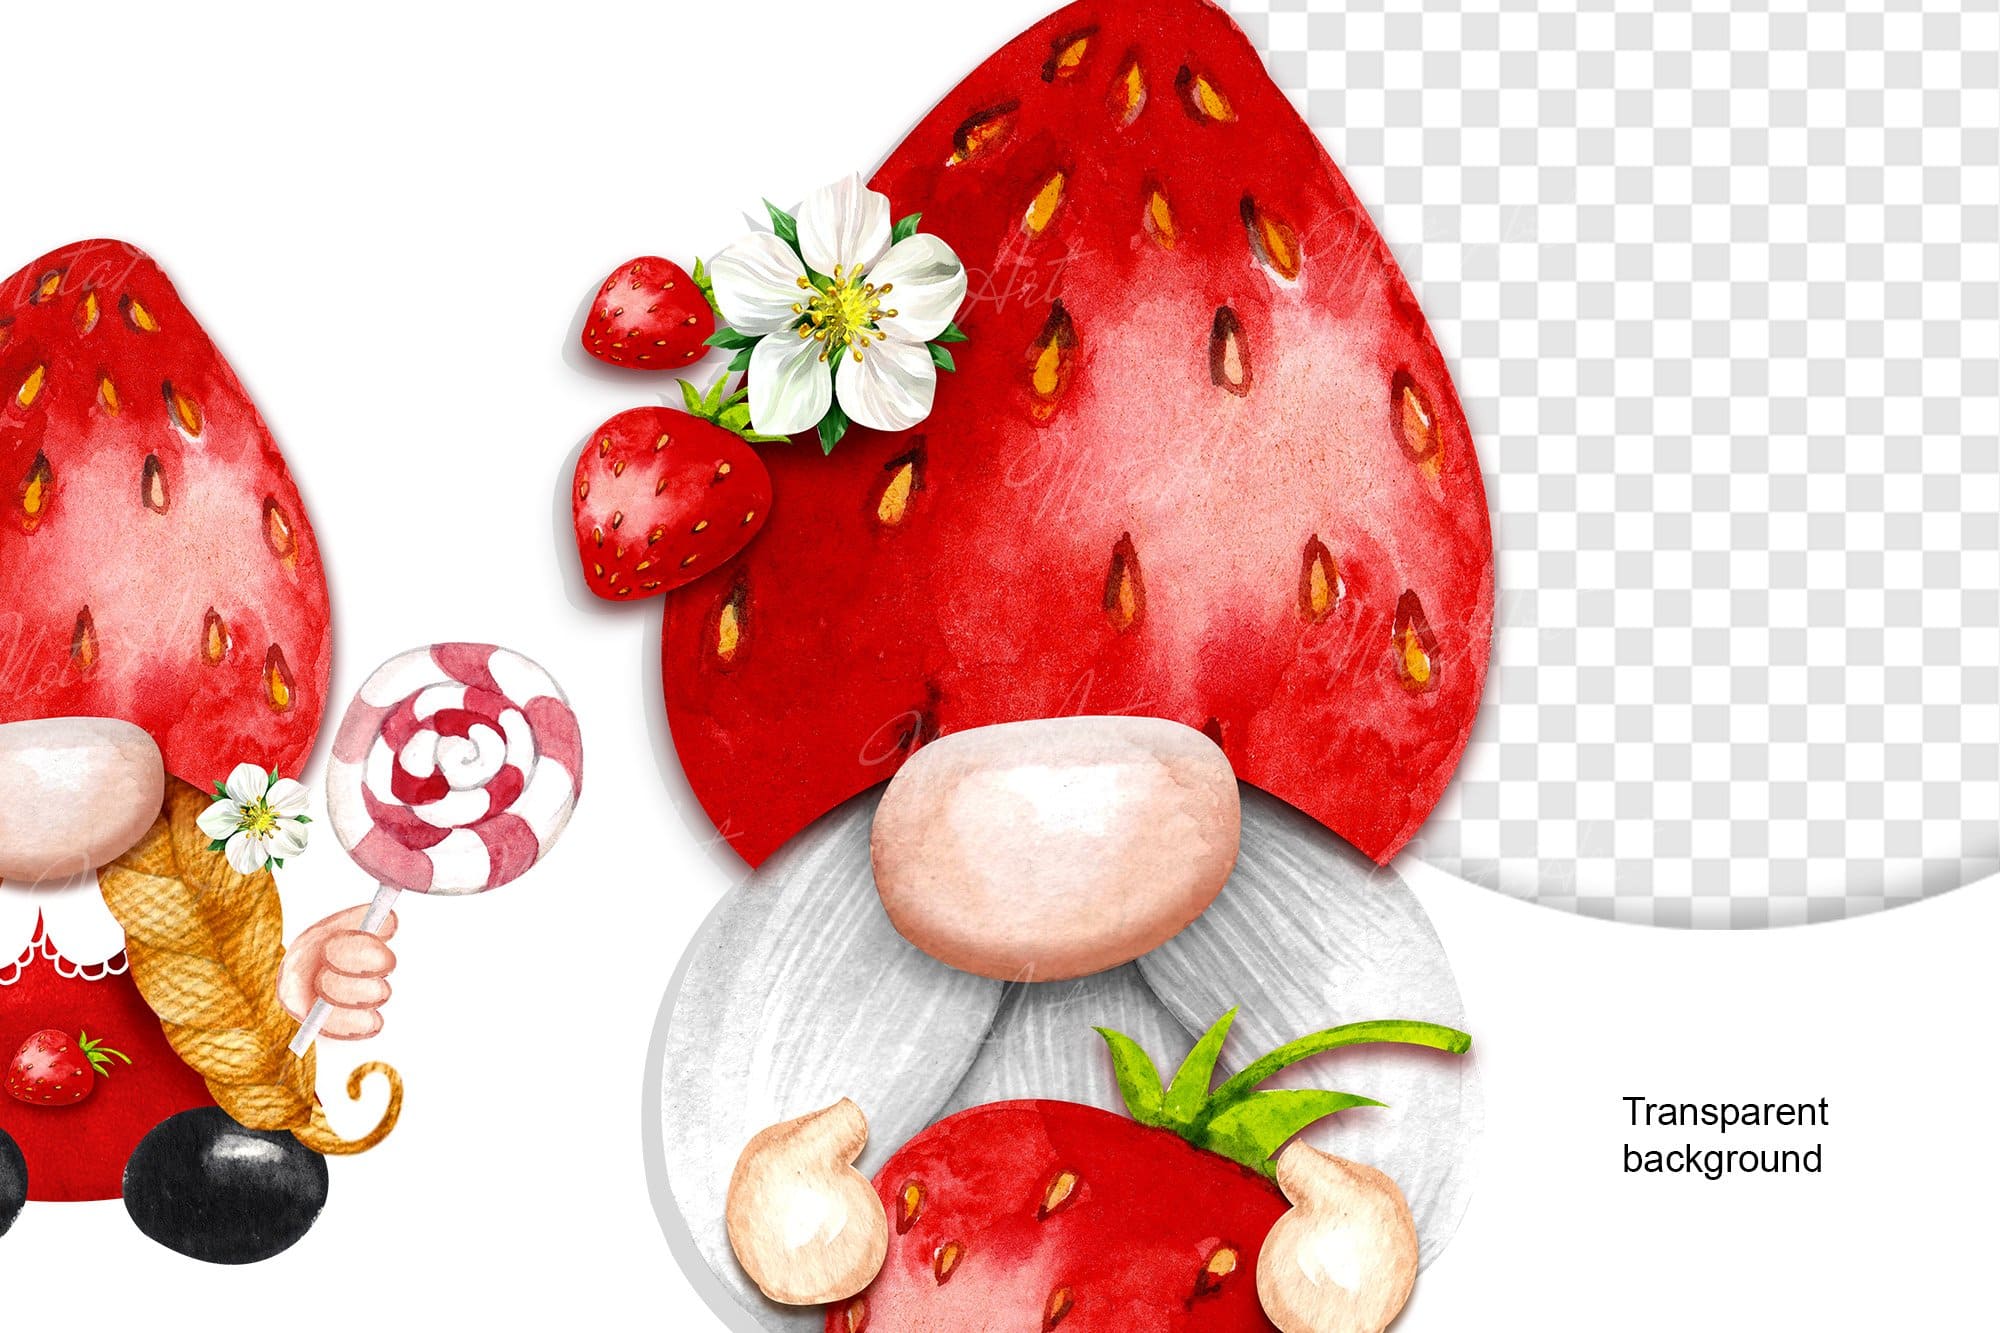 A close-up of a gnome's strawberry hat decorated with flowers and berries.